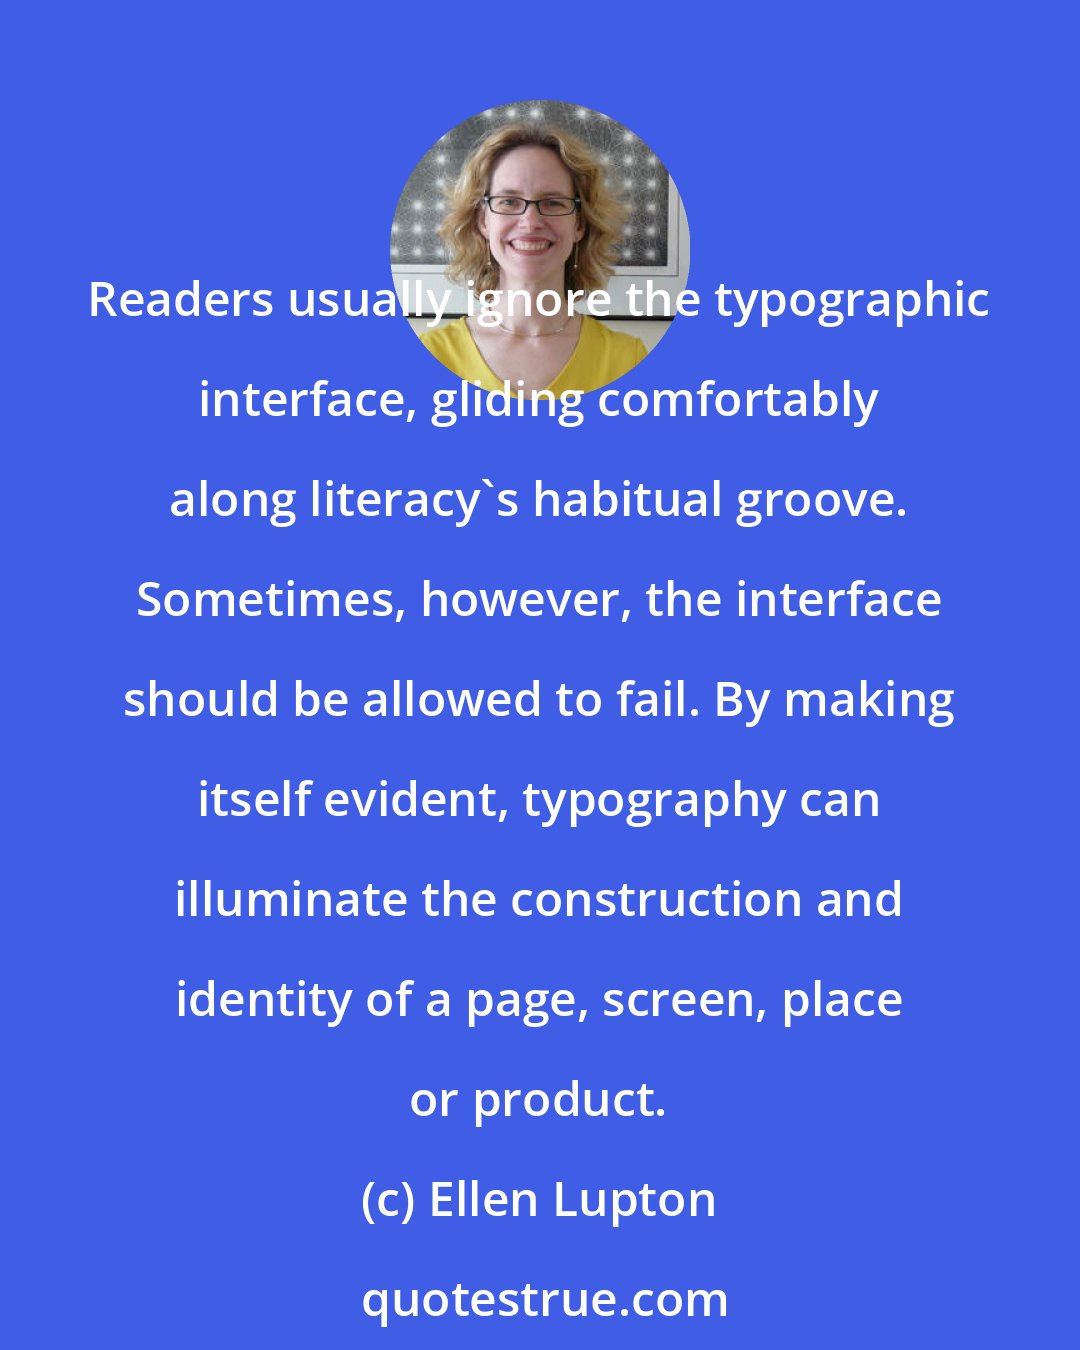 Ellen Lupton: Readers usually ignore the typographic interface, gliding comfortably along literacy's habitual groove. Sometimes, however, the interface should be allowed to fail. By making itself evident, typography can illuminate the construction and identity of a page, screen, place or product.